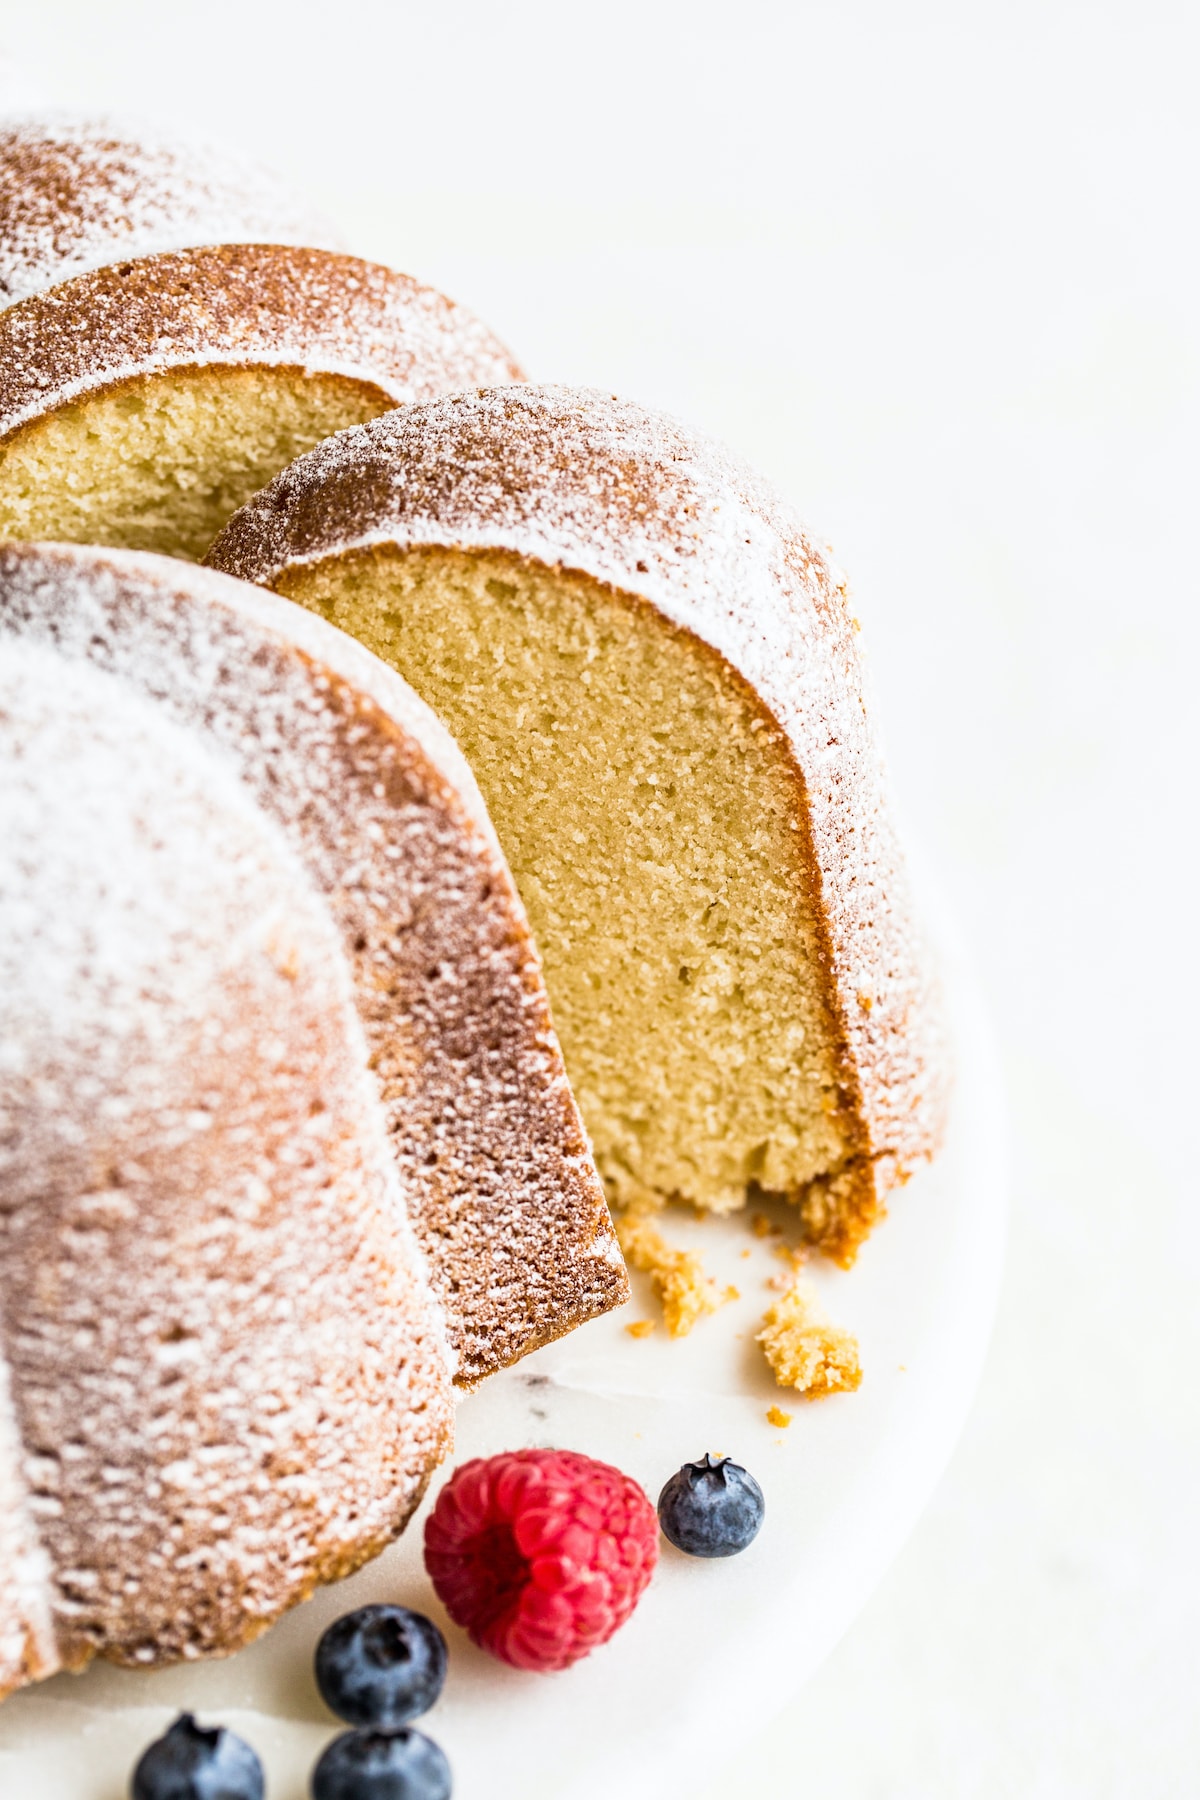 Bundt pound cake, dusted in powdered sugar. A slice is cut from the cake, revealing the inside of the cake. Some berries are beside the cake.